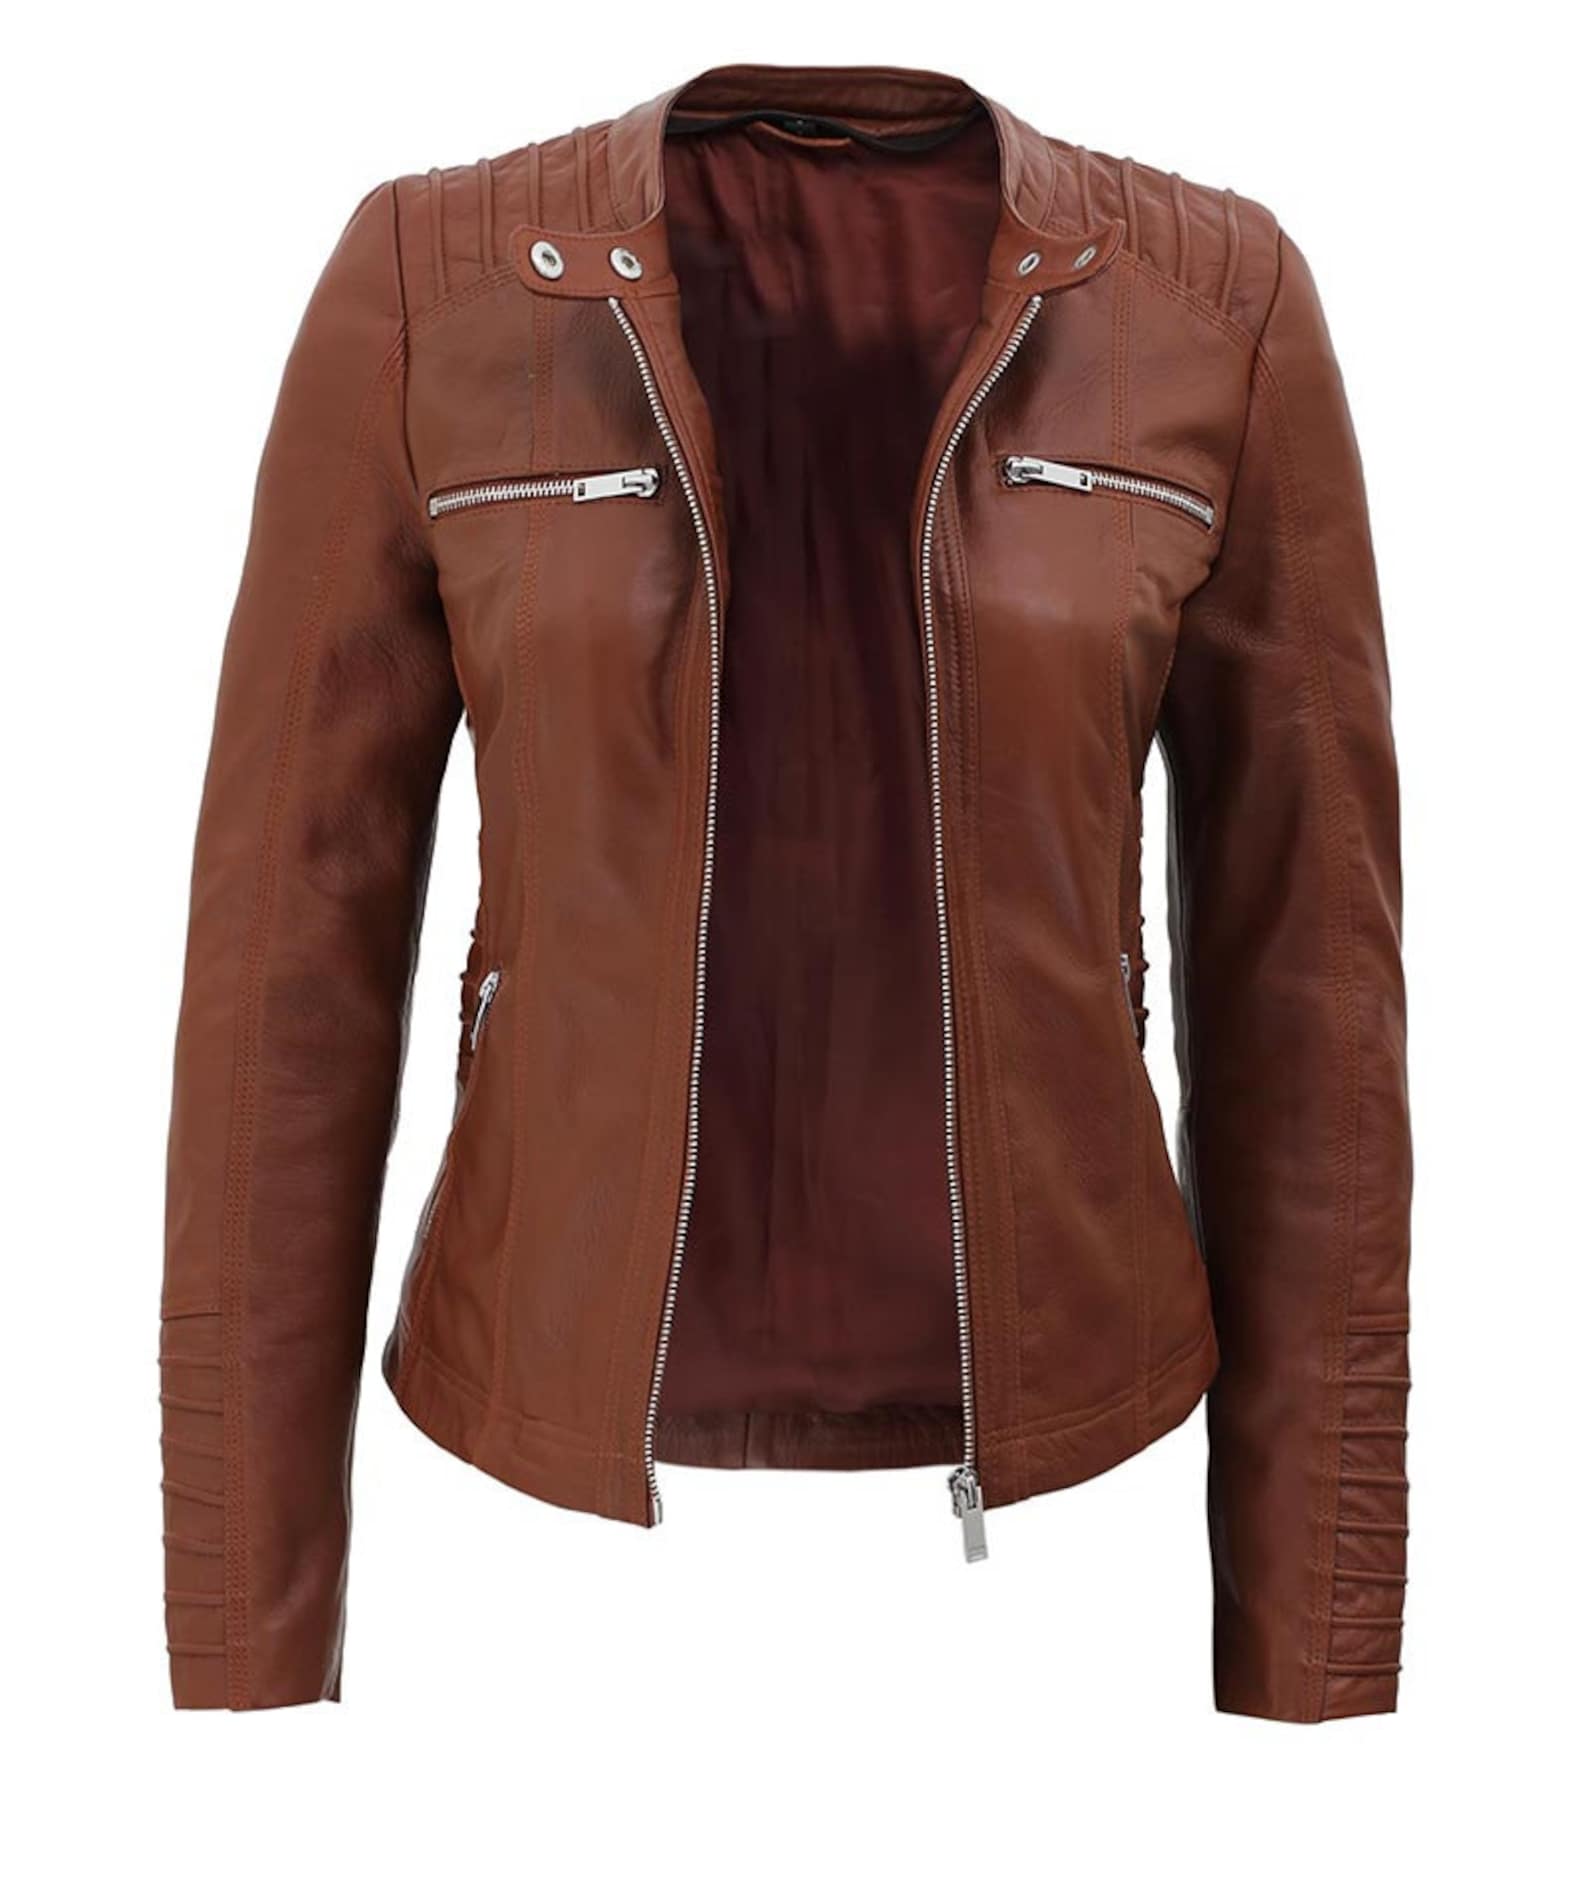 Womens Brown Cafe Racer Leather Jacket With Removable Hood | Etsy